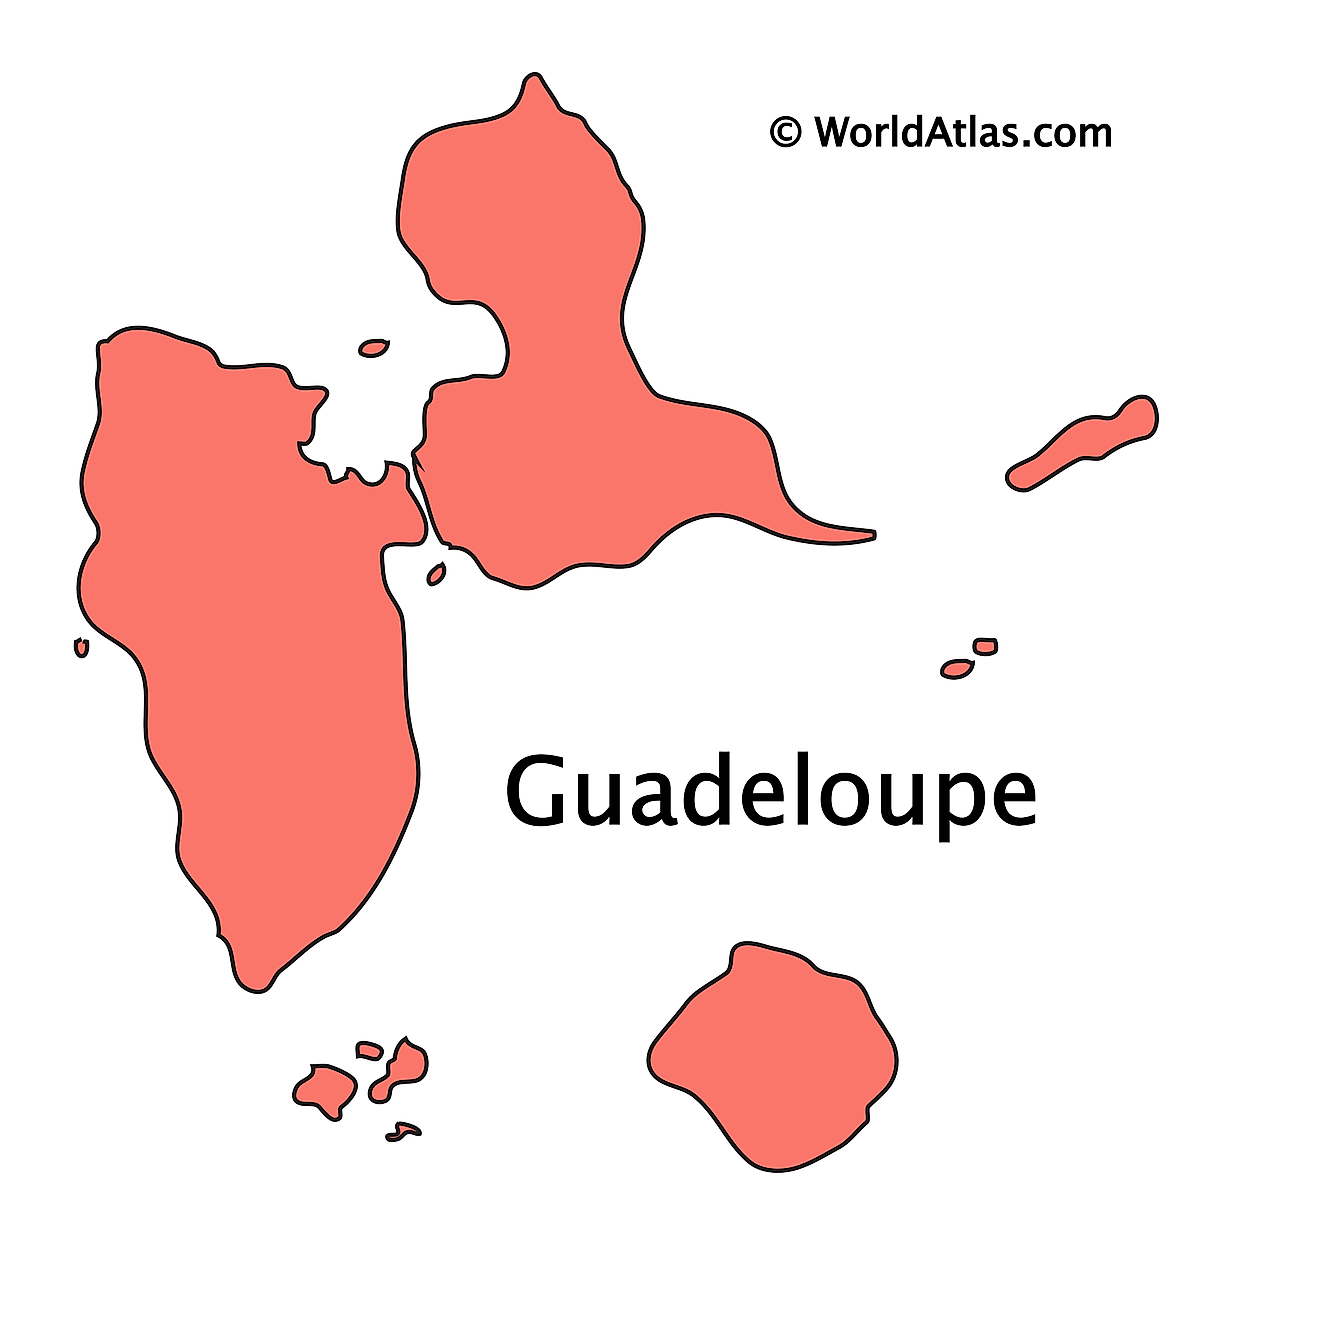 Outline Map of Guadeloupe